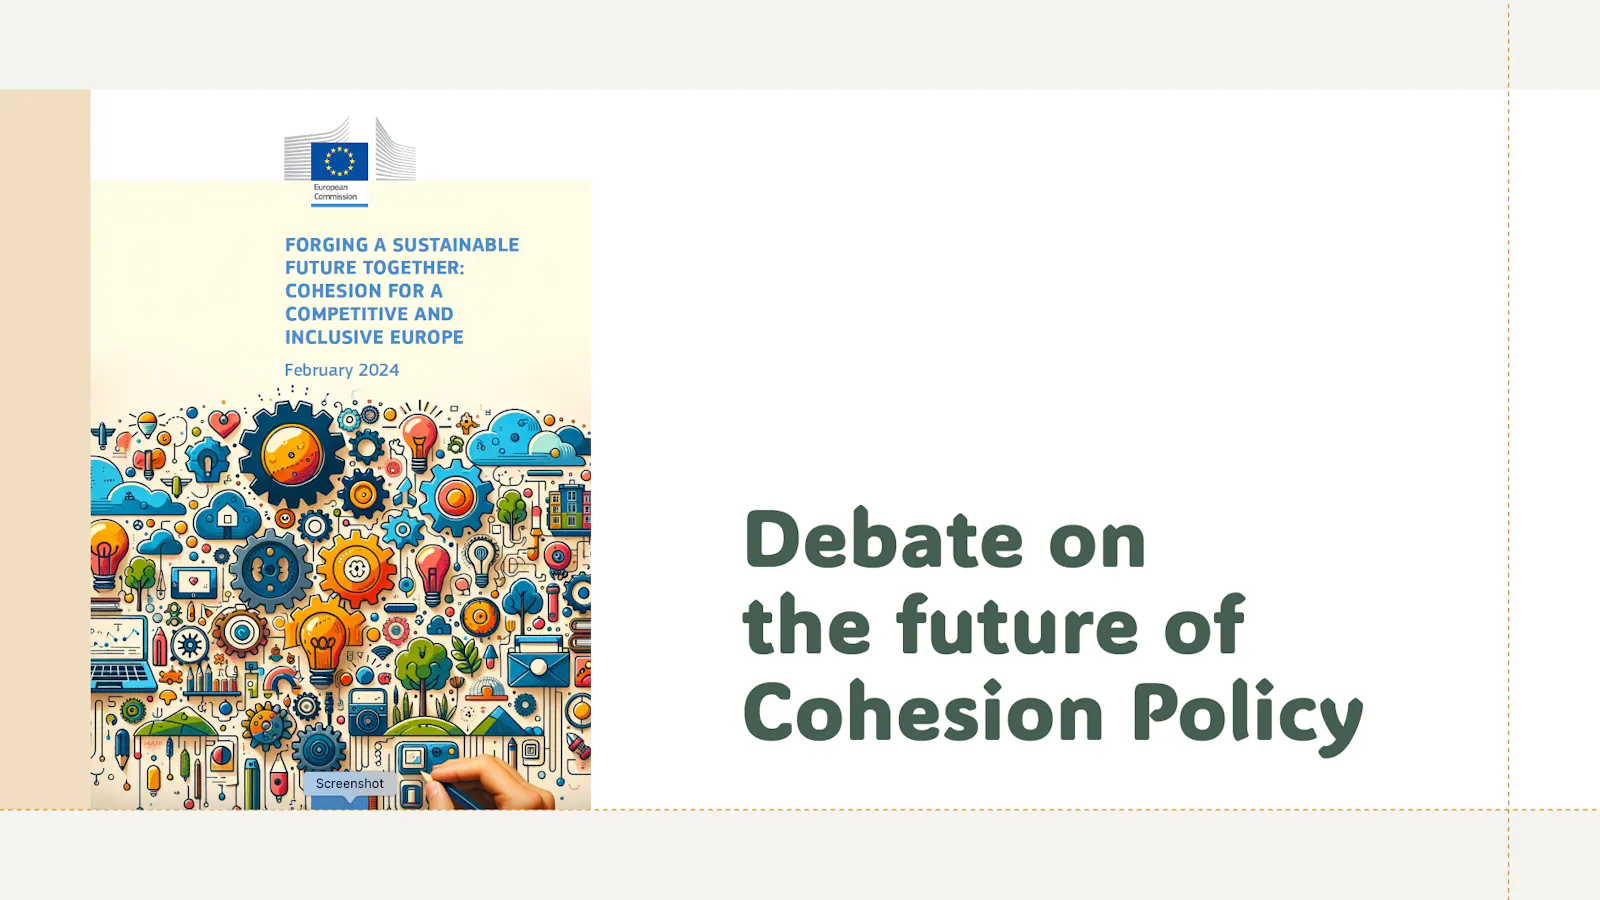 Debate on the future of Cohesion Policy